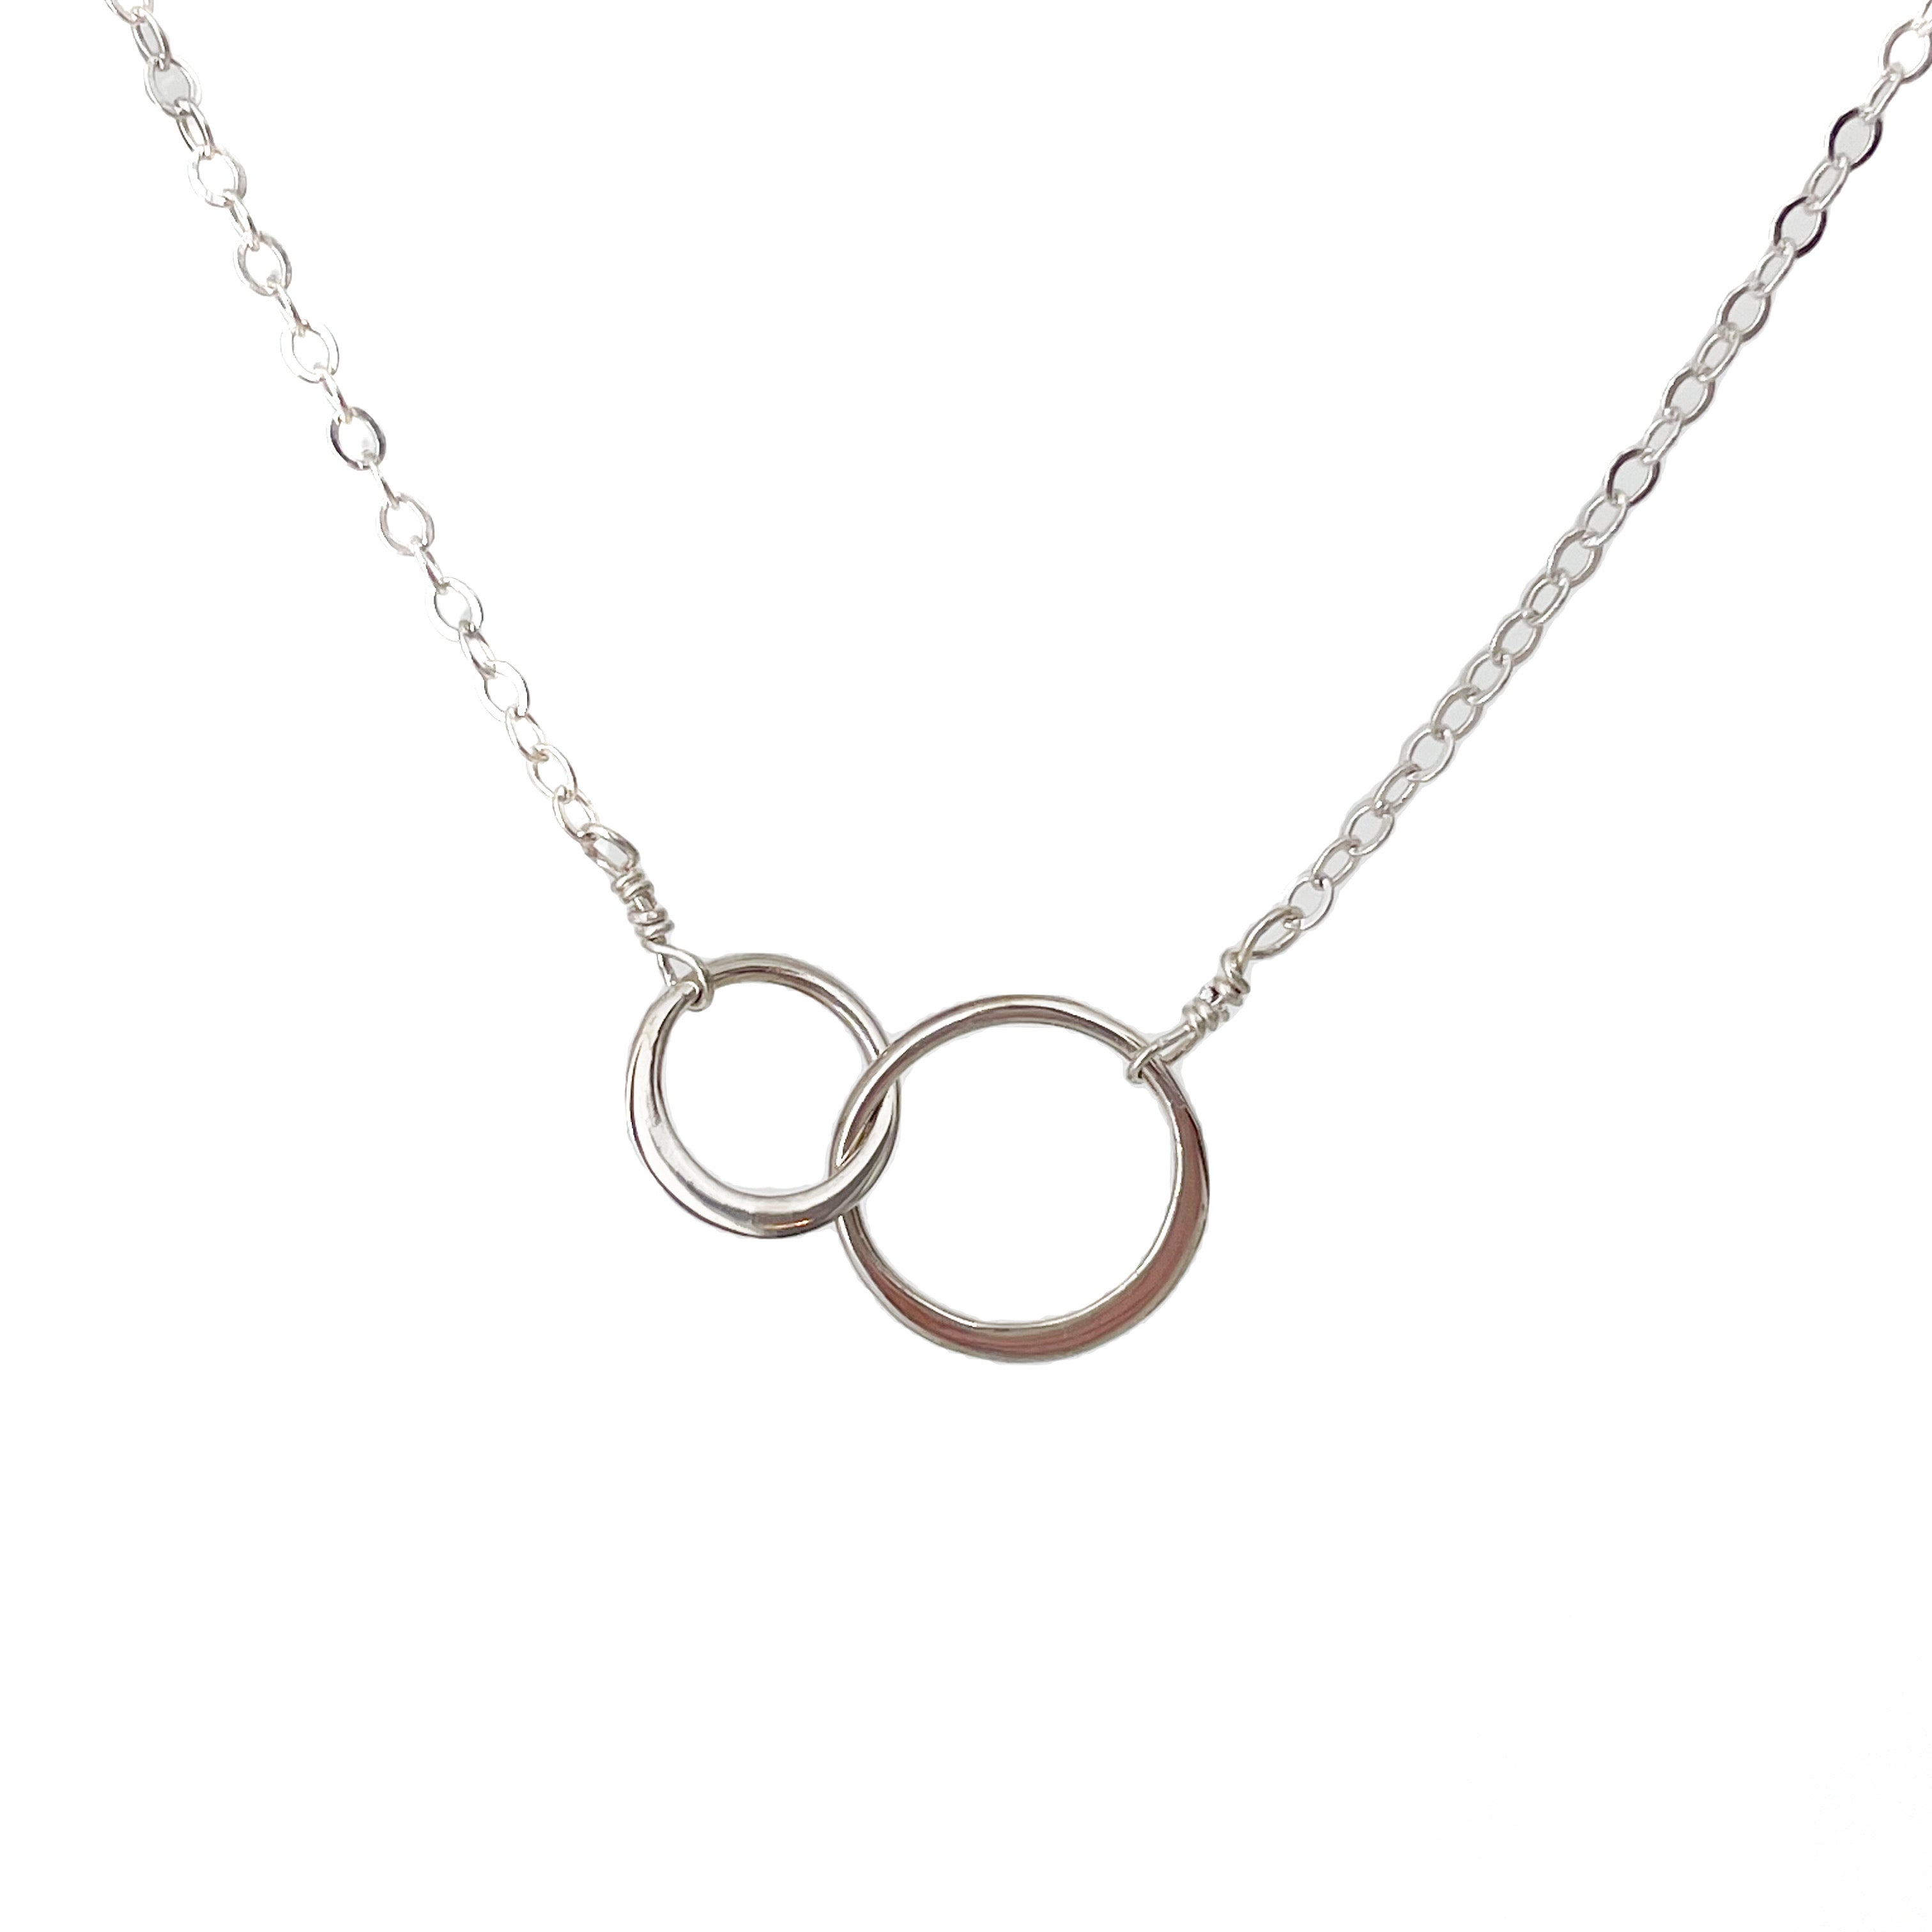 Gold Entwined Rings Necklace, Linked Circles, Gold Circles, Simple Gold  Necklace, Interlocking Circles, Infinity, Mother's Day - Etsy | Gold  necklace simple, Necklace, Jewelry necklace simple